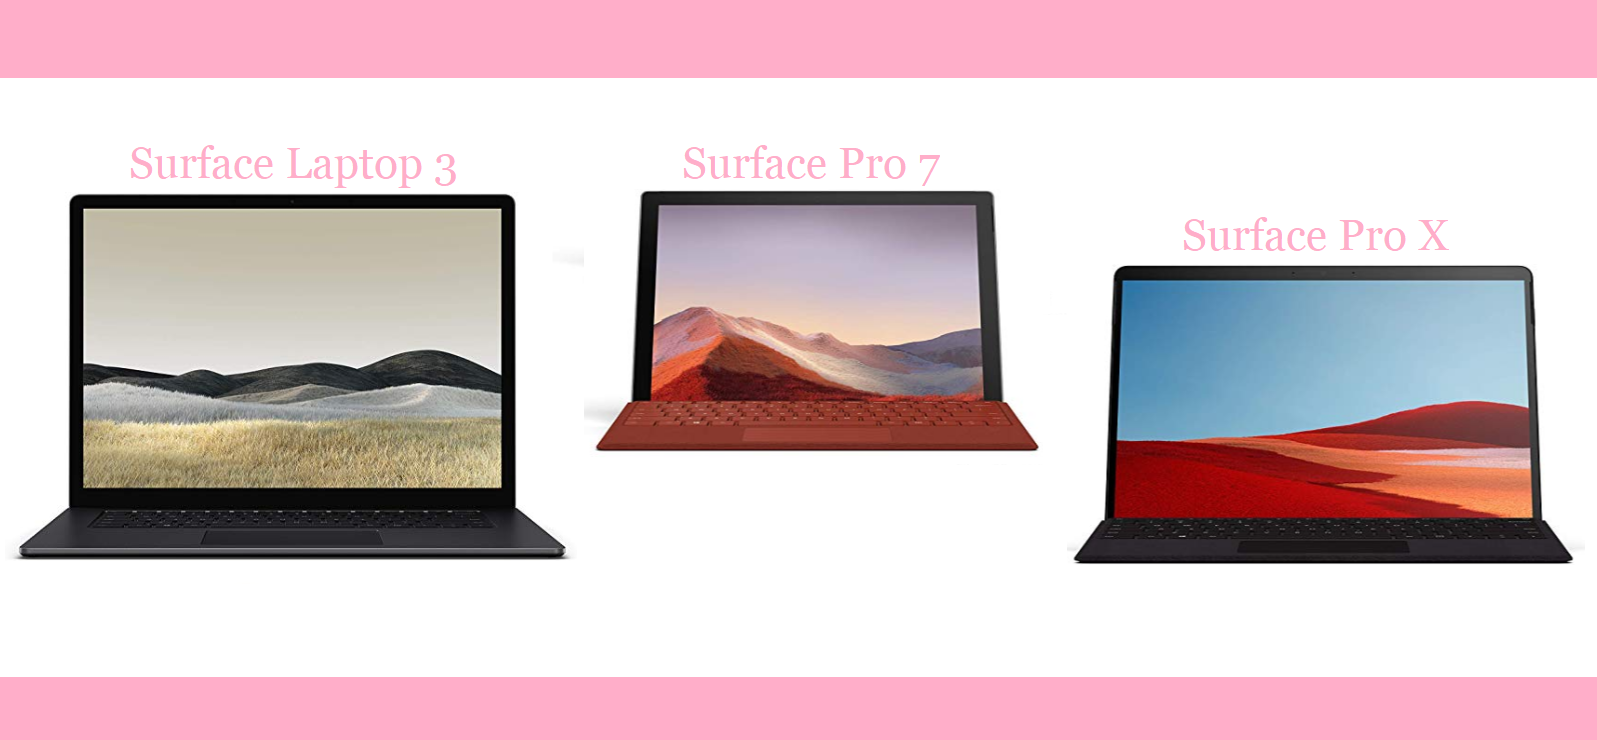 Newest Microsoft Surface Devices 2019, Surface Laptop 3, Surface Pro 7, Surface Pro X